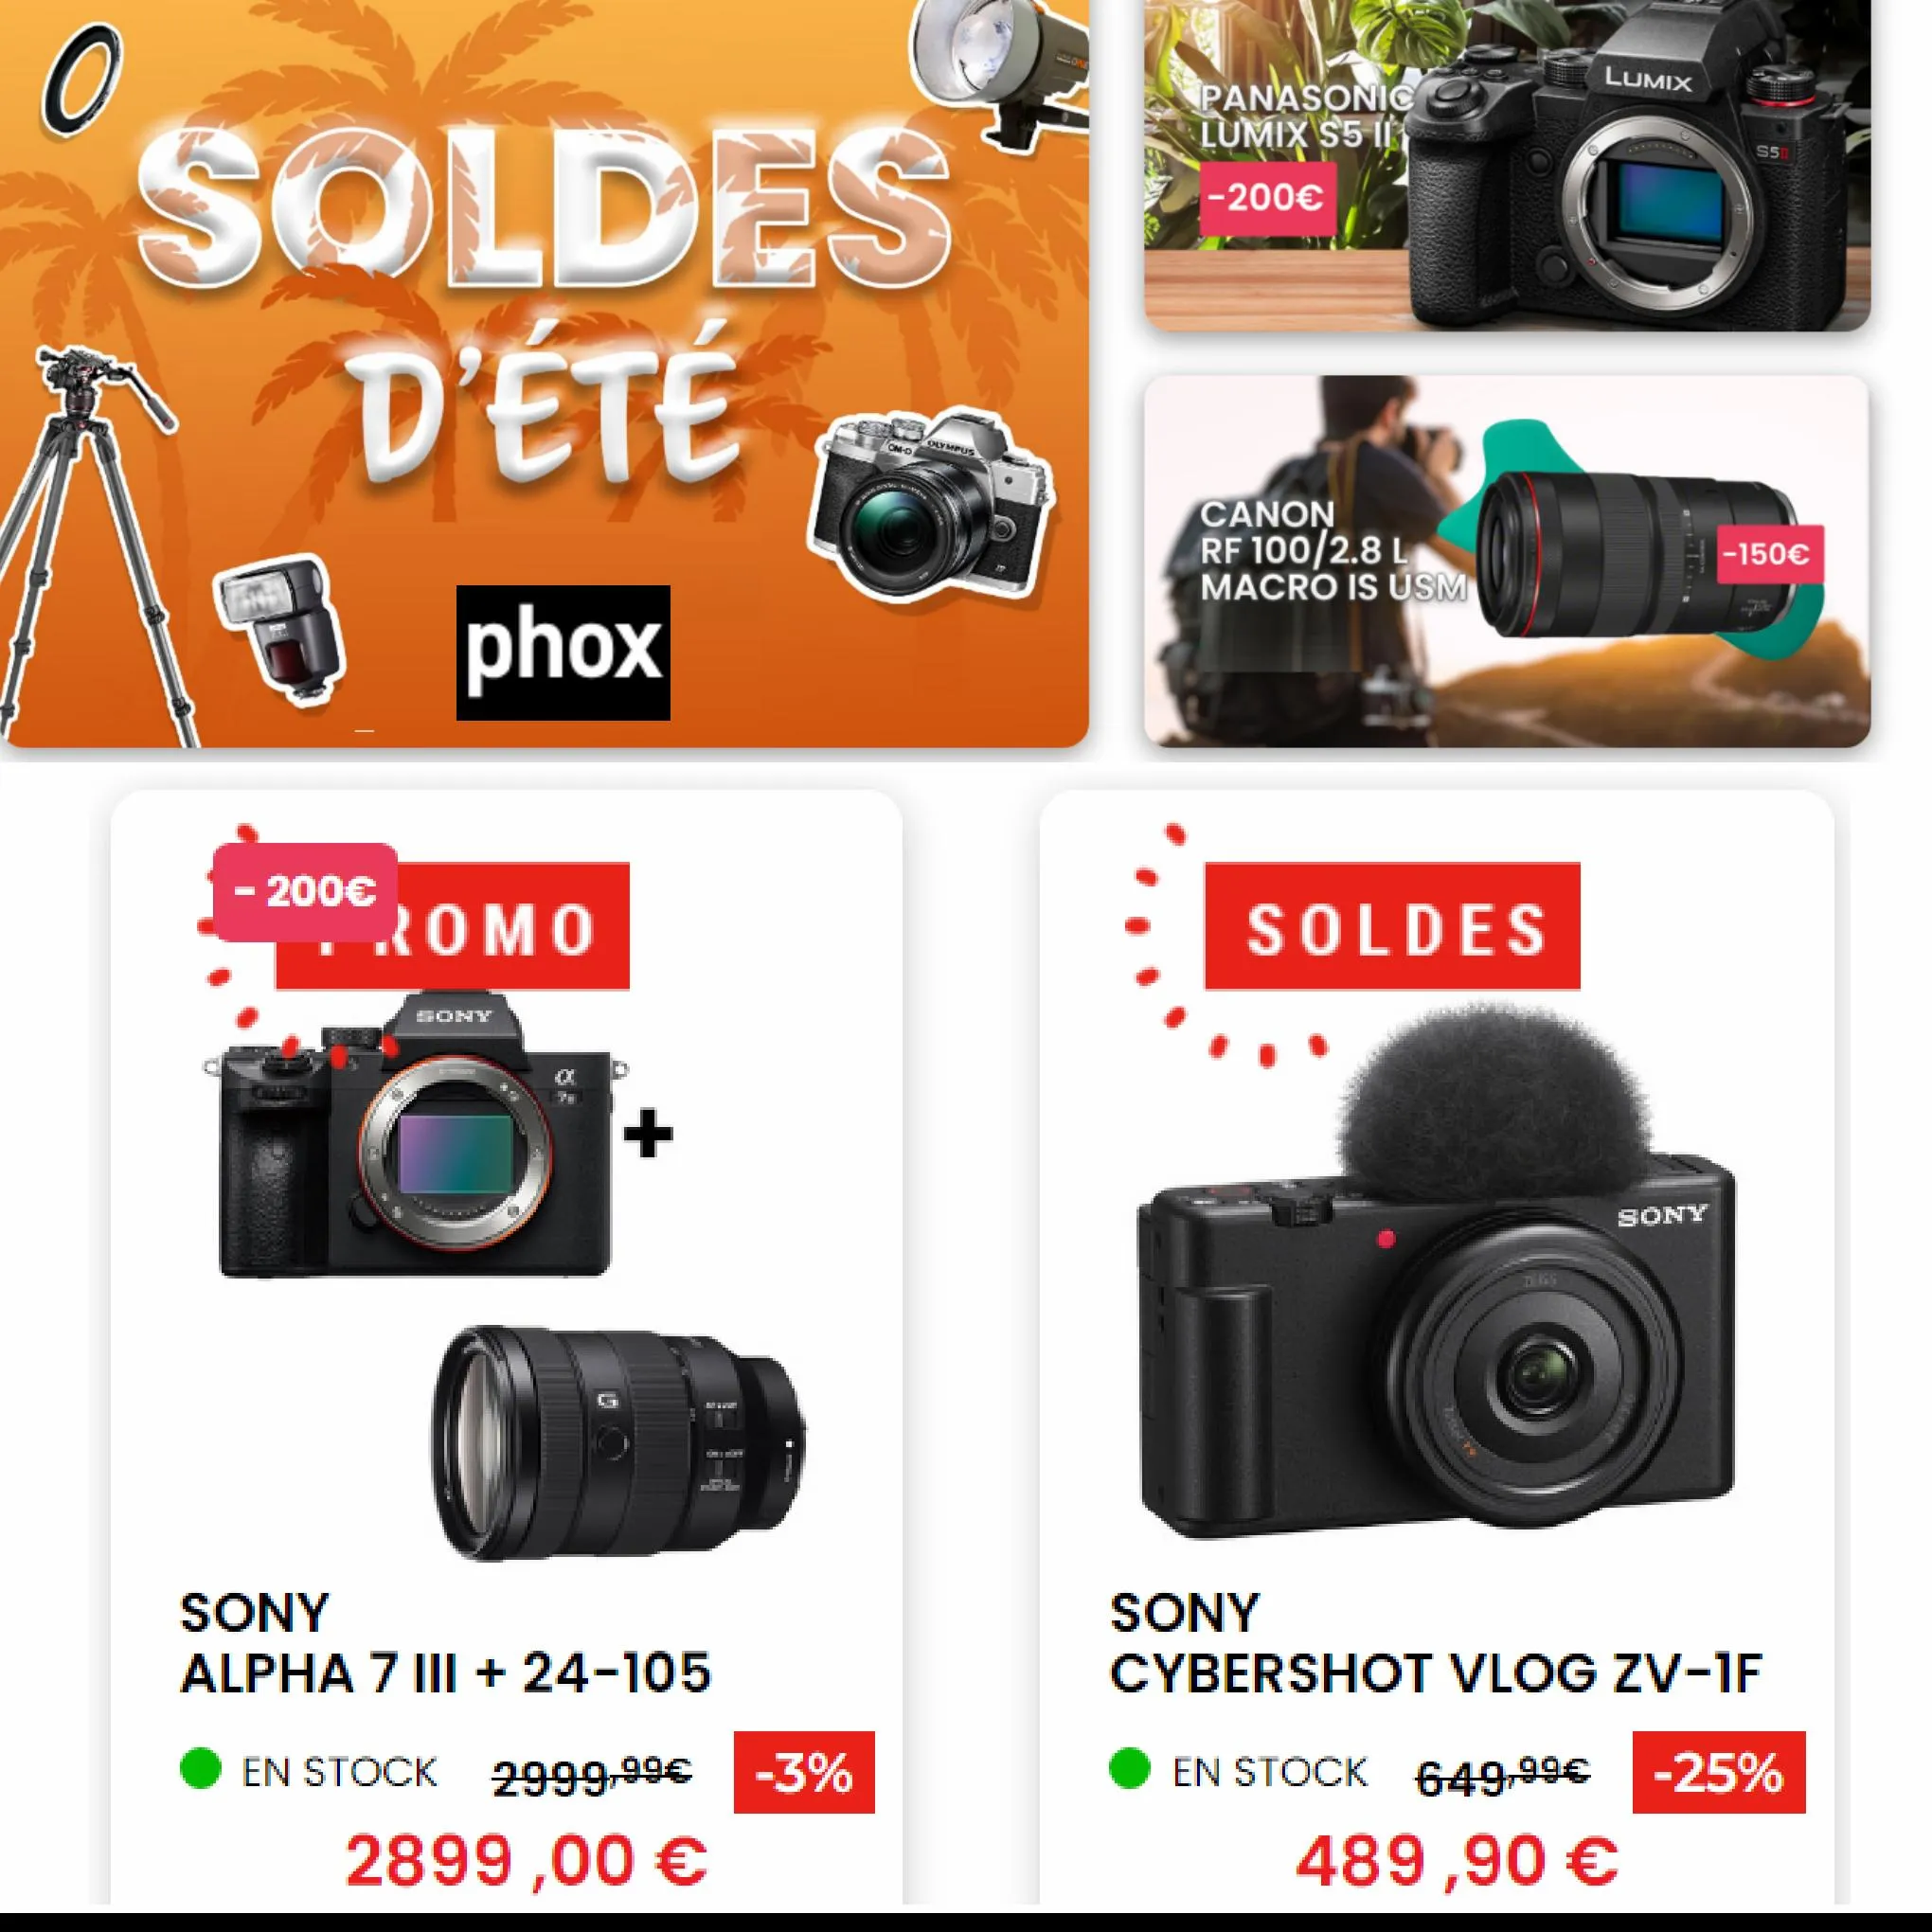 Catalogue Phox Soldes, page 00001